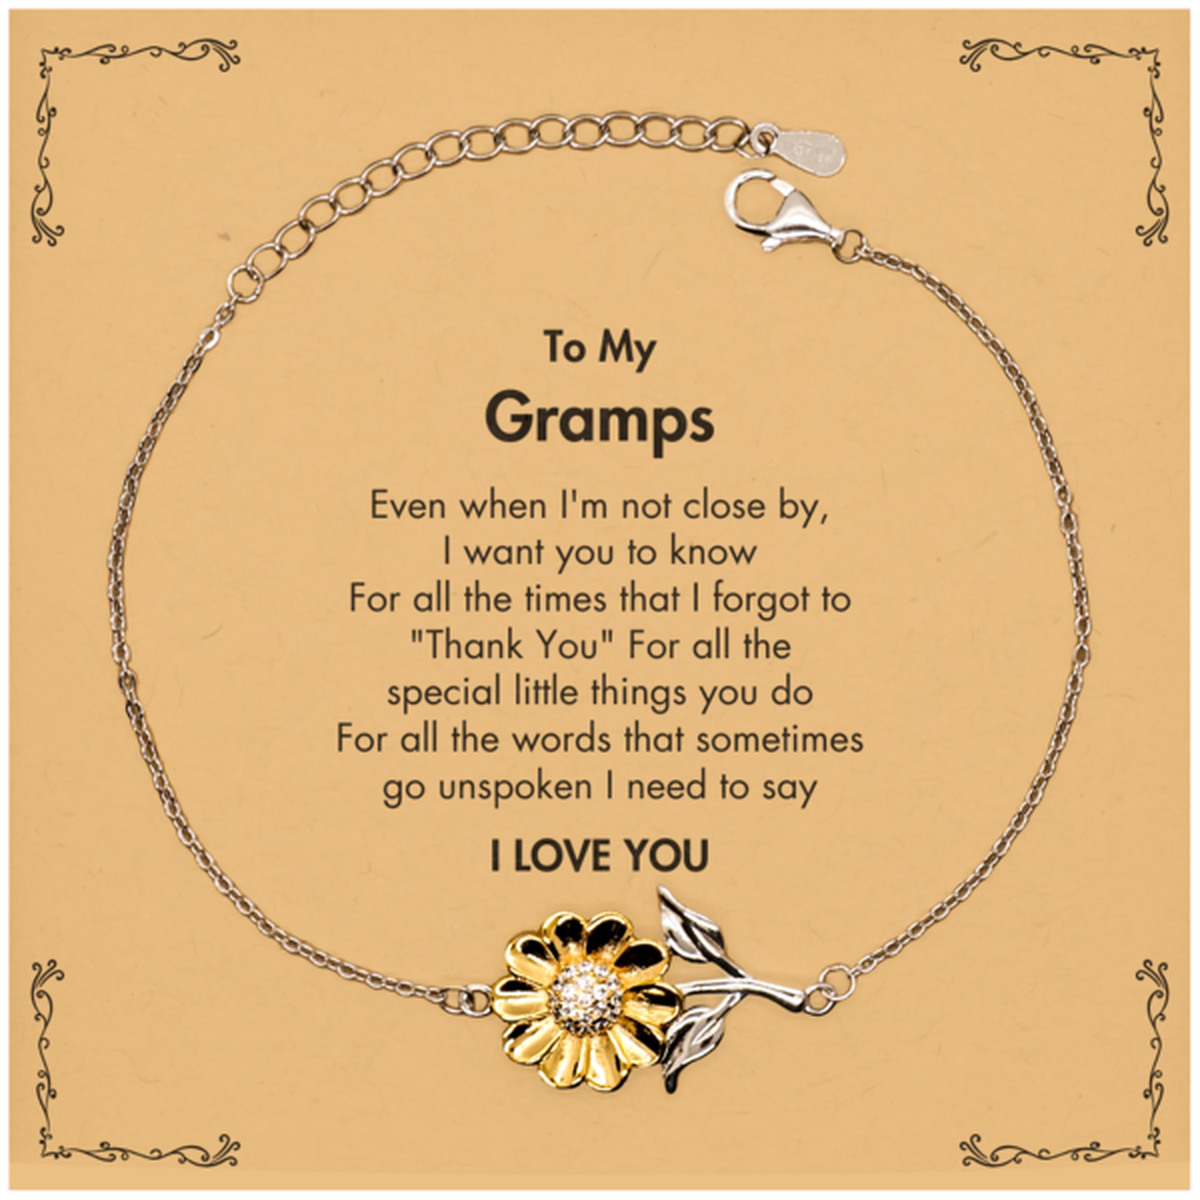 Thank You Gifts for Gramps, Keepsake Sunflower Bracelet Gifts for Gramps Birthday Mother's day Father's Day Gramps For all the words That sometimes go unspoken I need to say I LOVE YOU